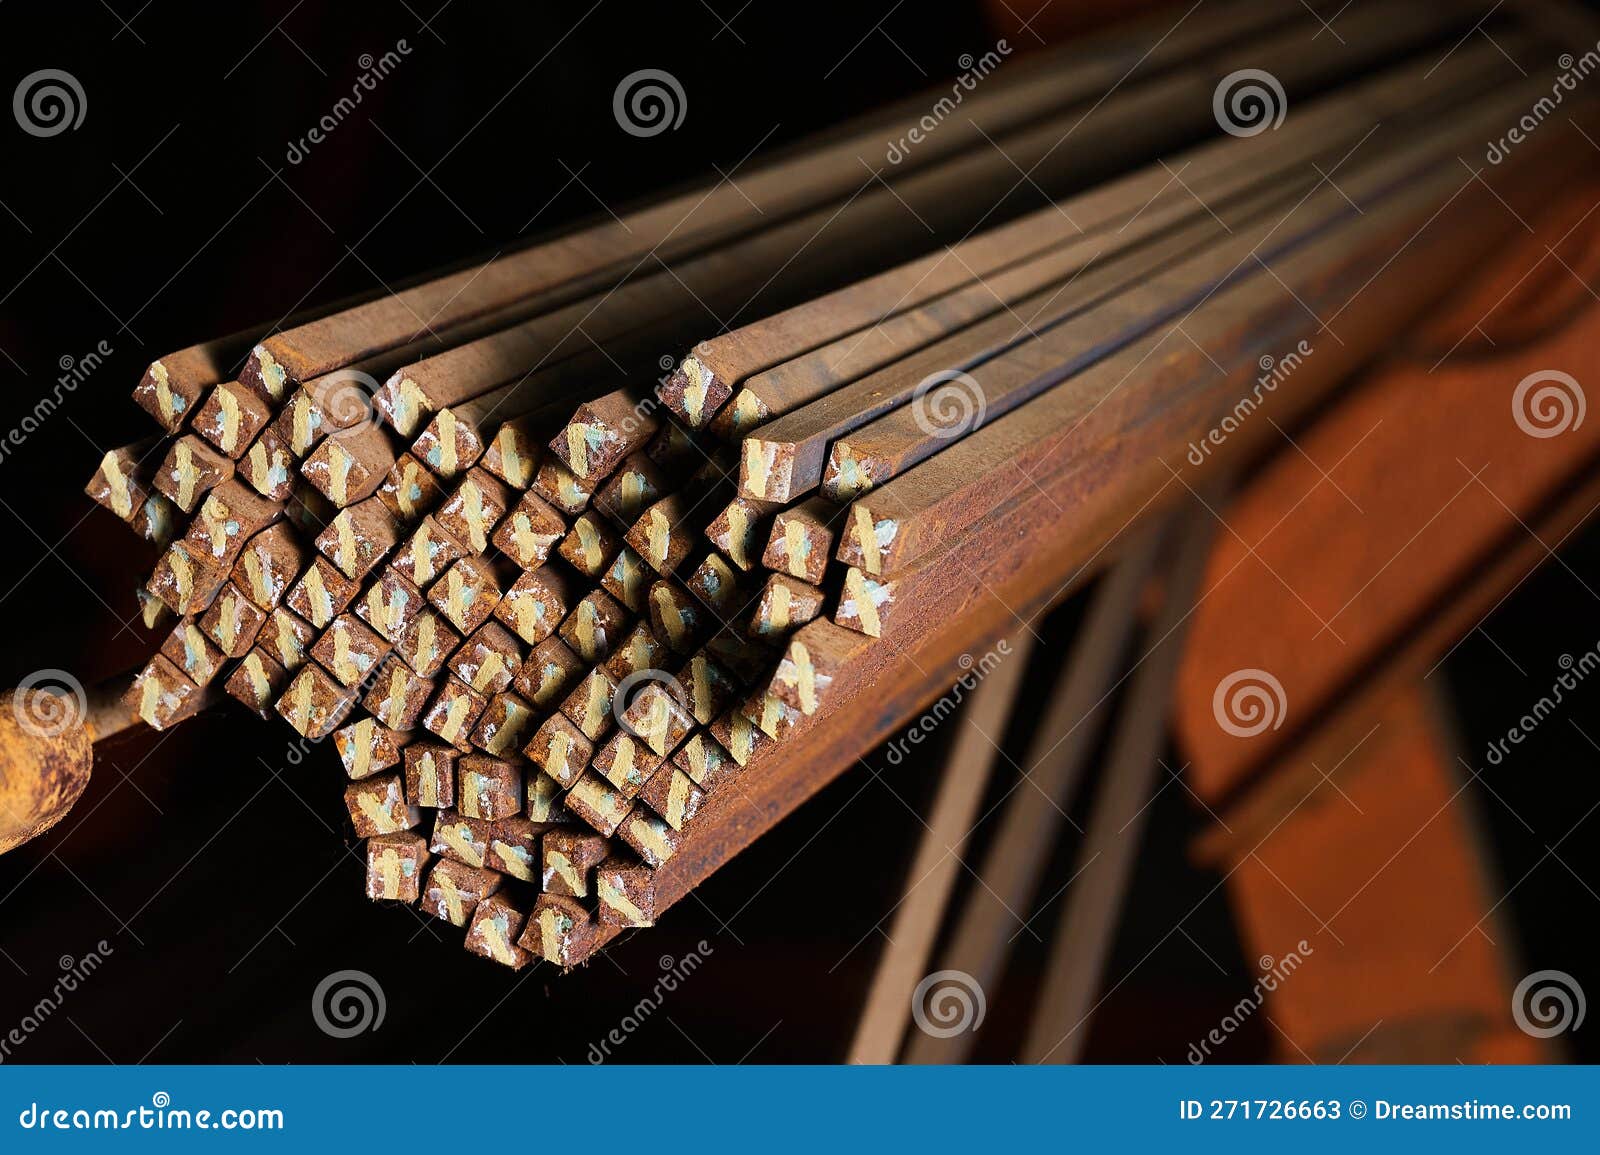 Thin Metal Rods Bunch in Cold Plant Warehouse Macro View Stock